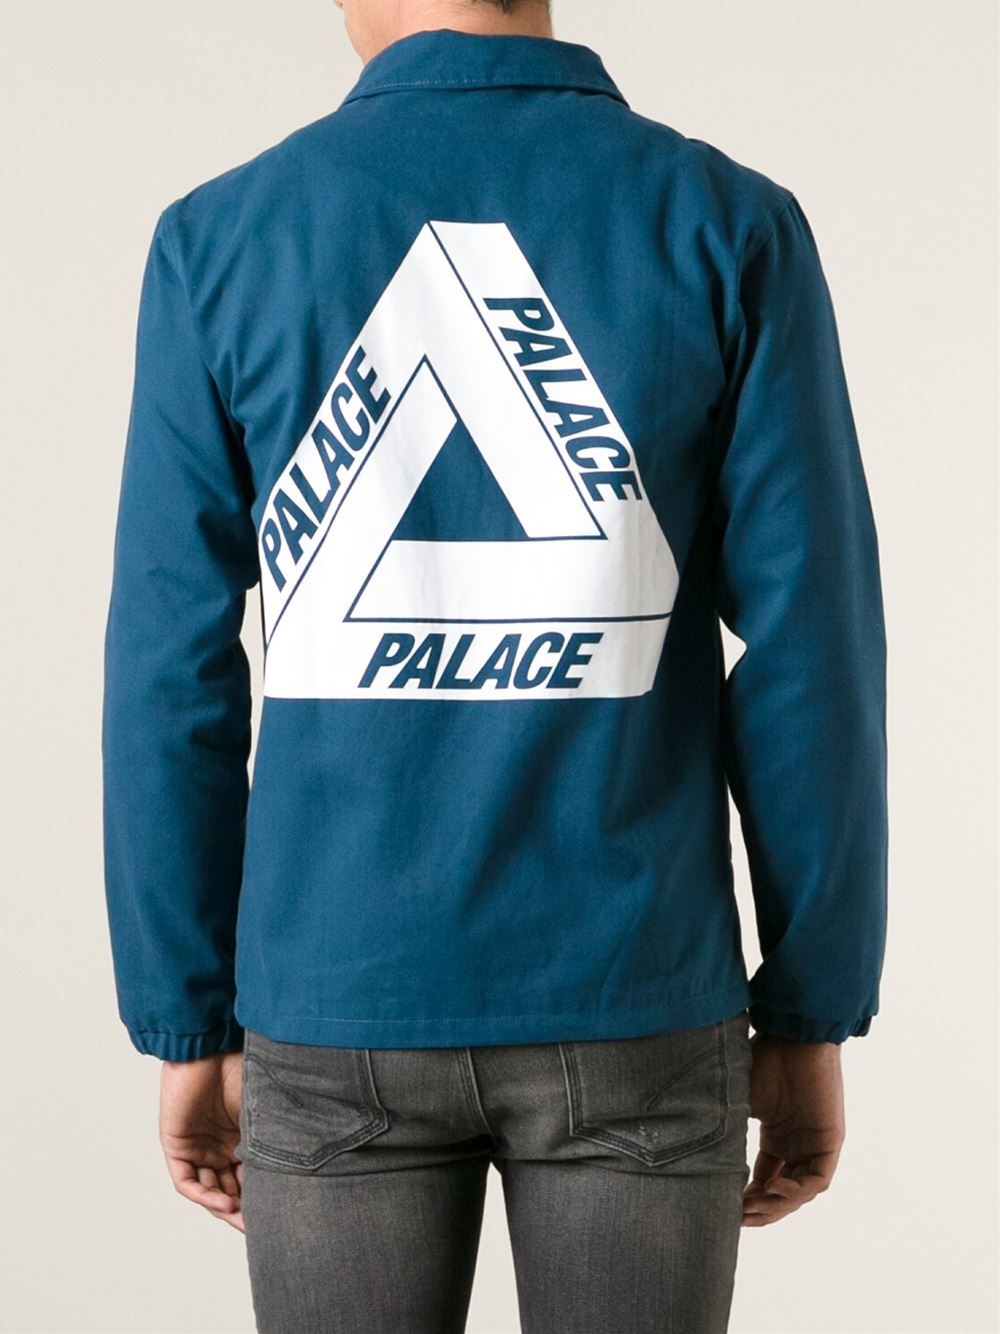 Lyst - Palace Coach Jacket in Blue for Men